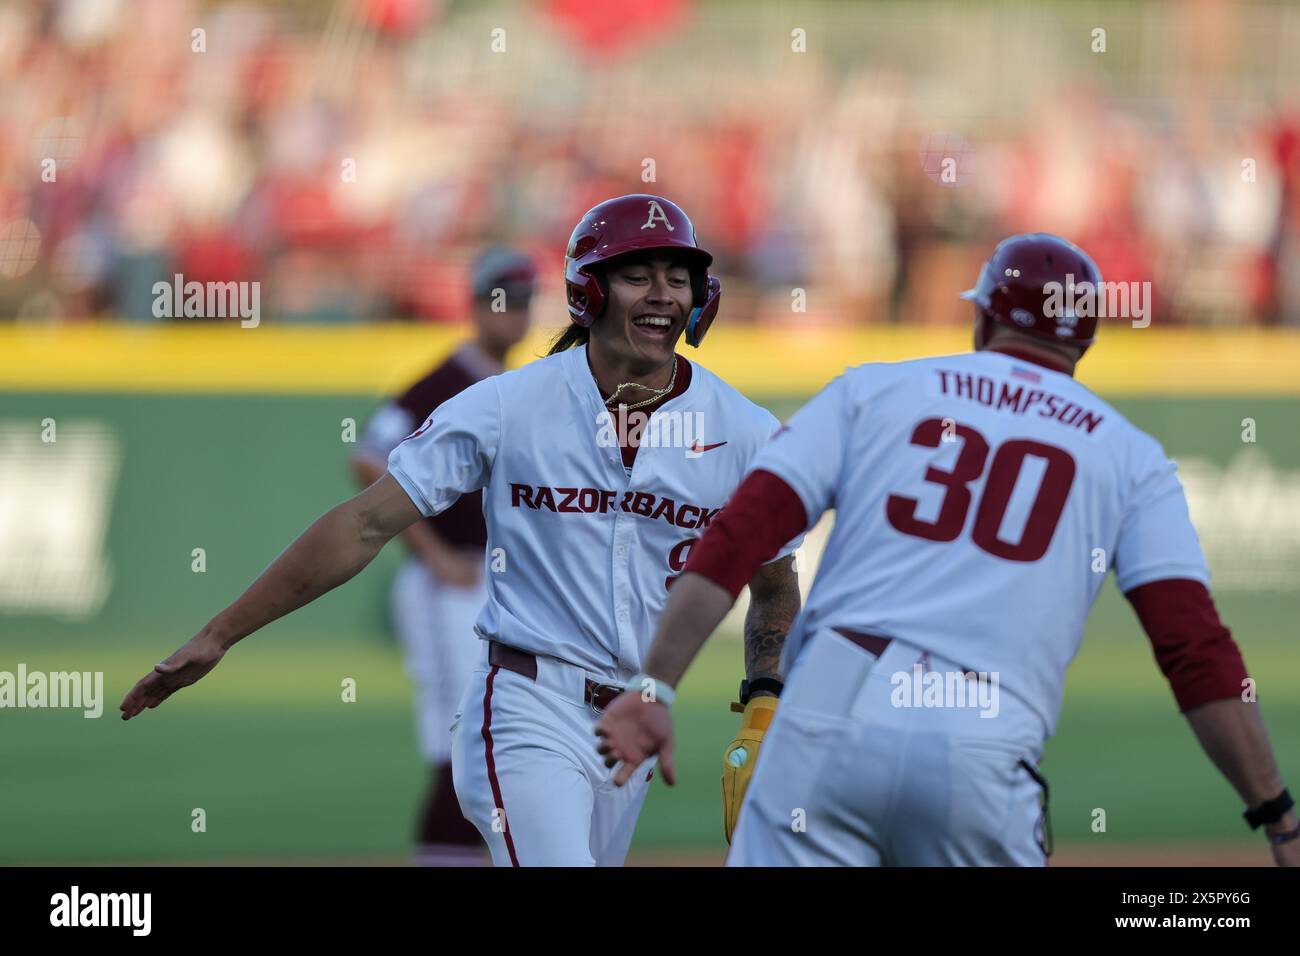 May 10, 2024: Wehiwa Aloy #9 gives a hand slap to third base coach Nate Thompson #30 as he comes around third base after being driven in by a home run. Arkansas defeated Mississippi State 7-5 in Fayetteville, AR. Richey Miller/CSM Stock Photo